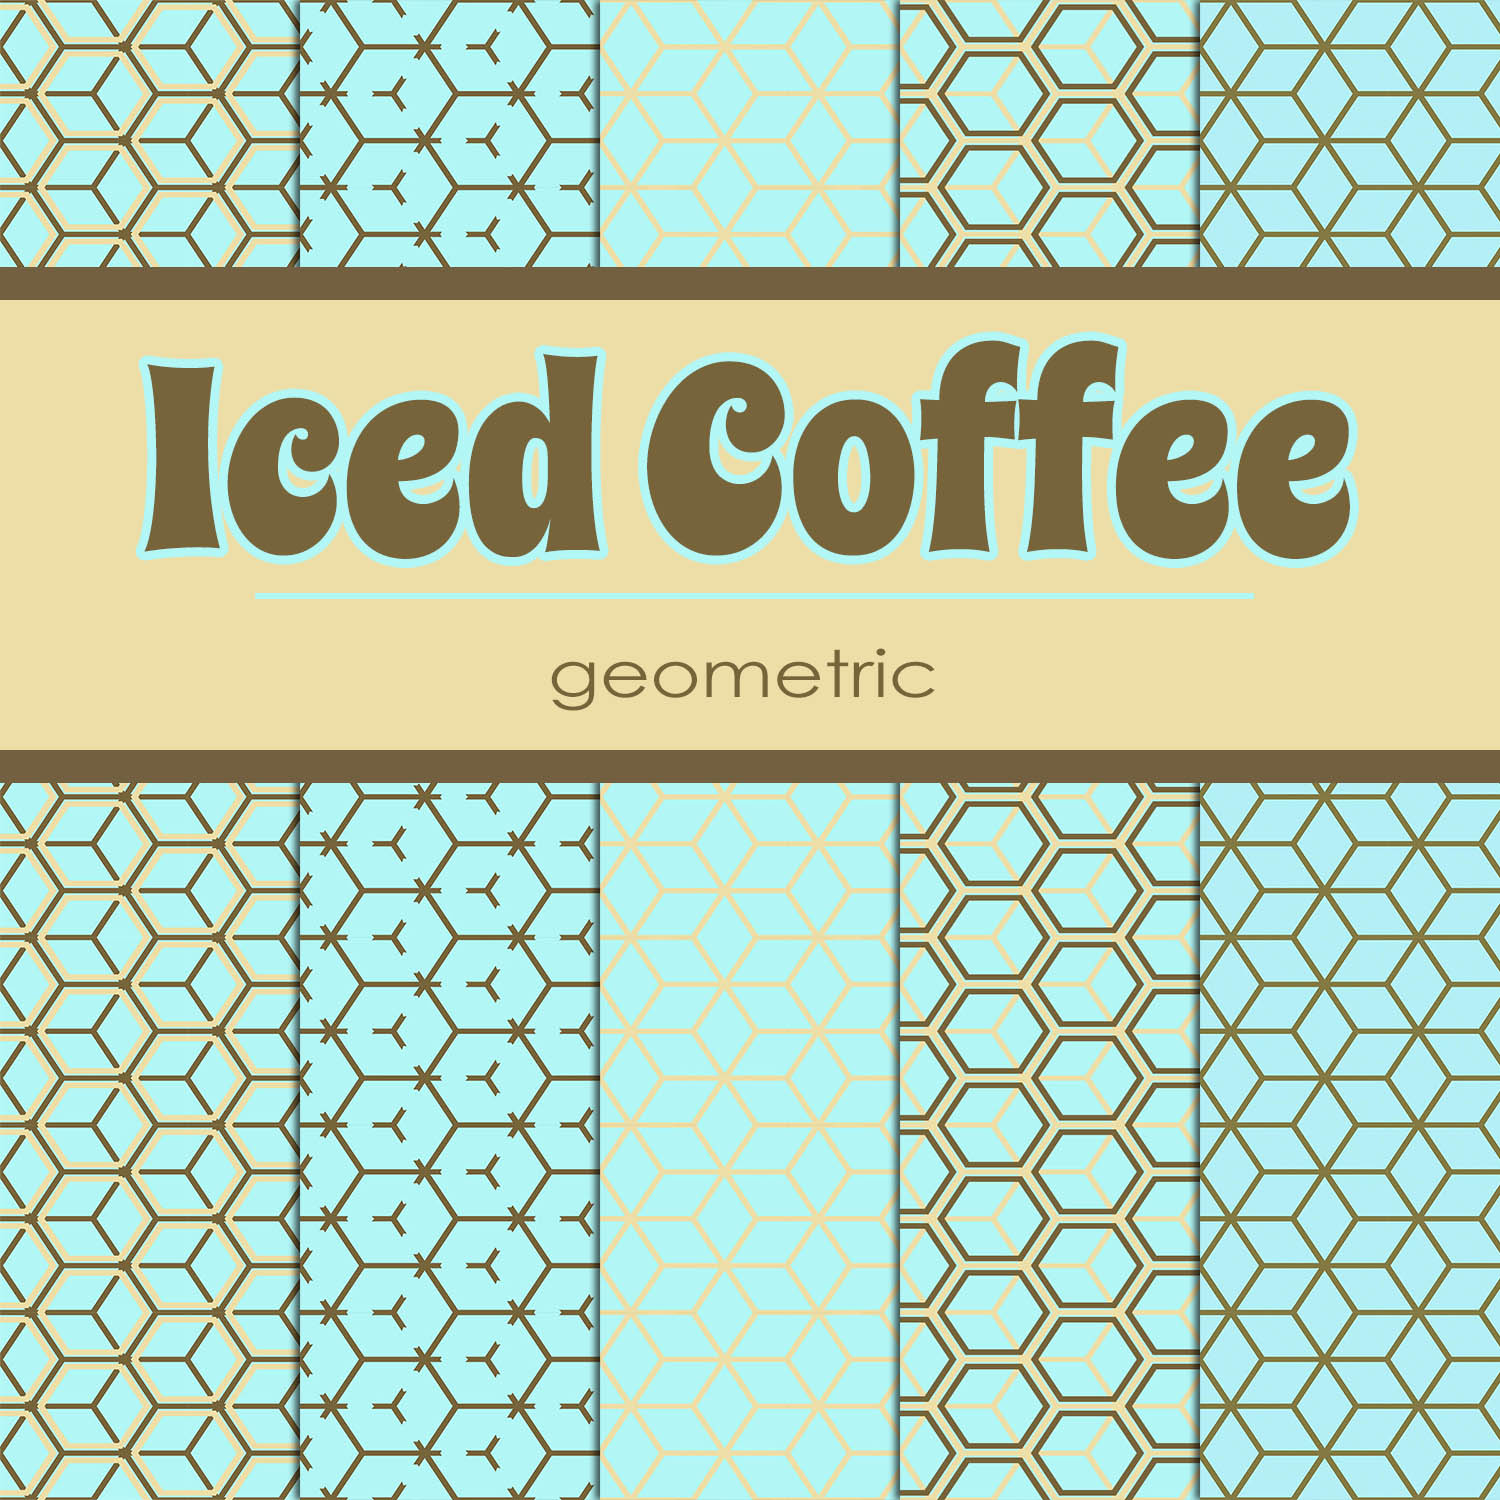 Free Iced Coffee: Geometric Patterned Papers